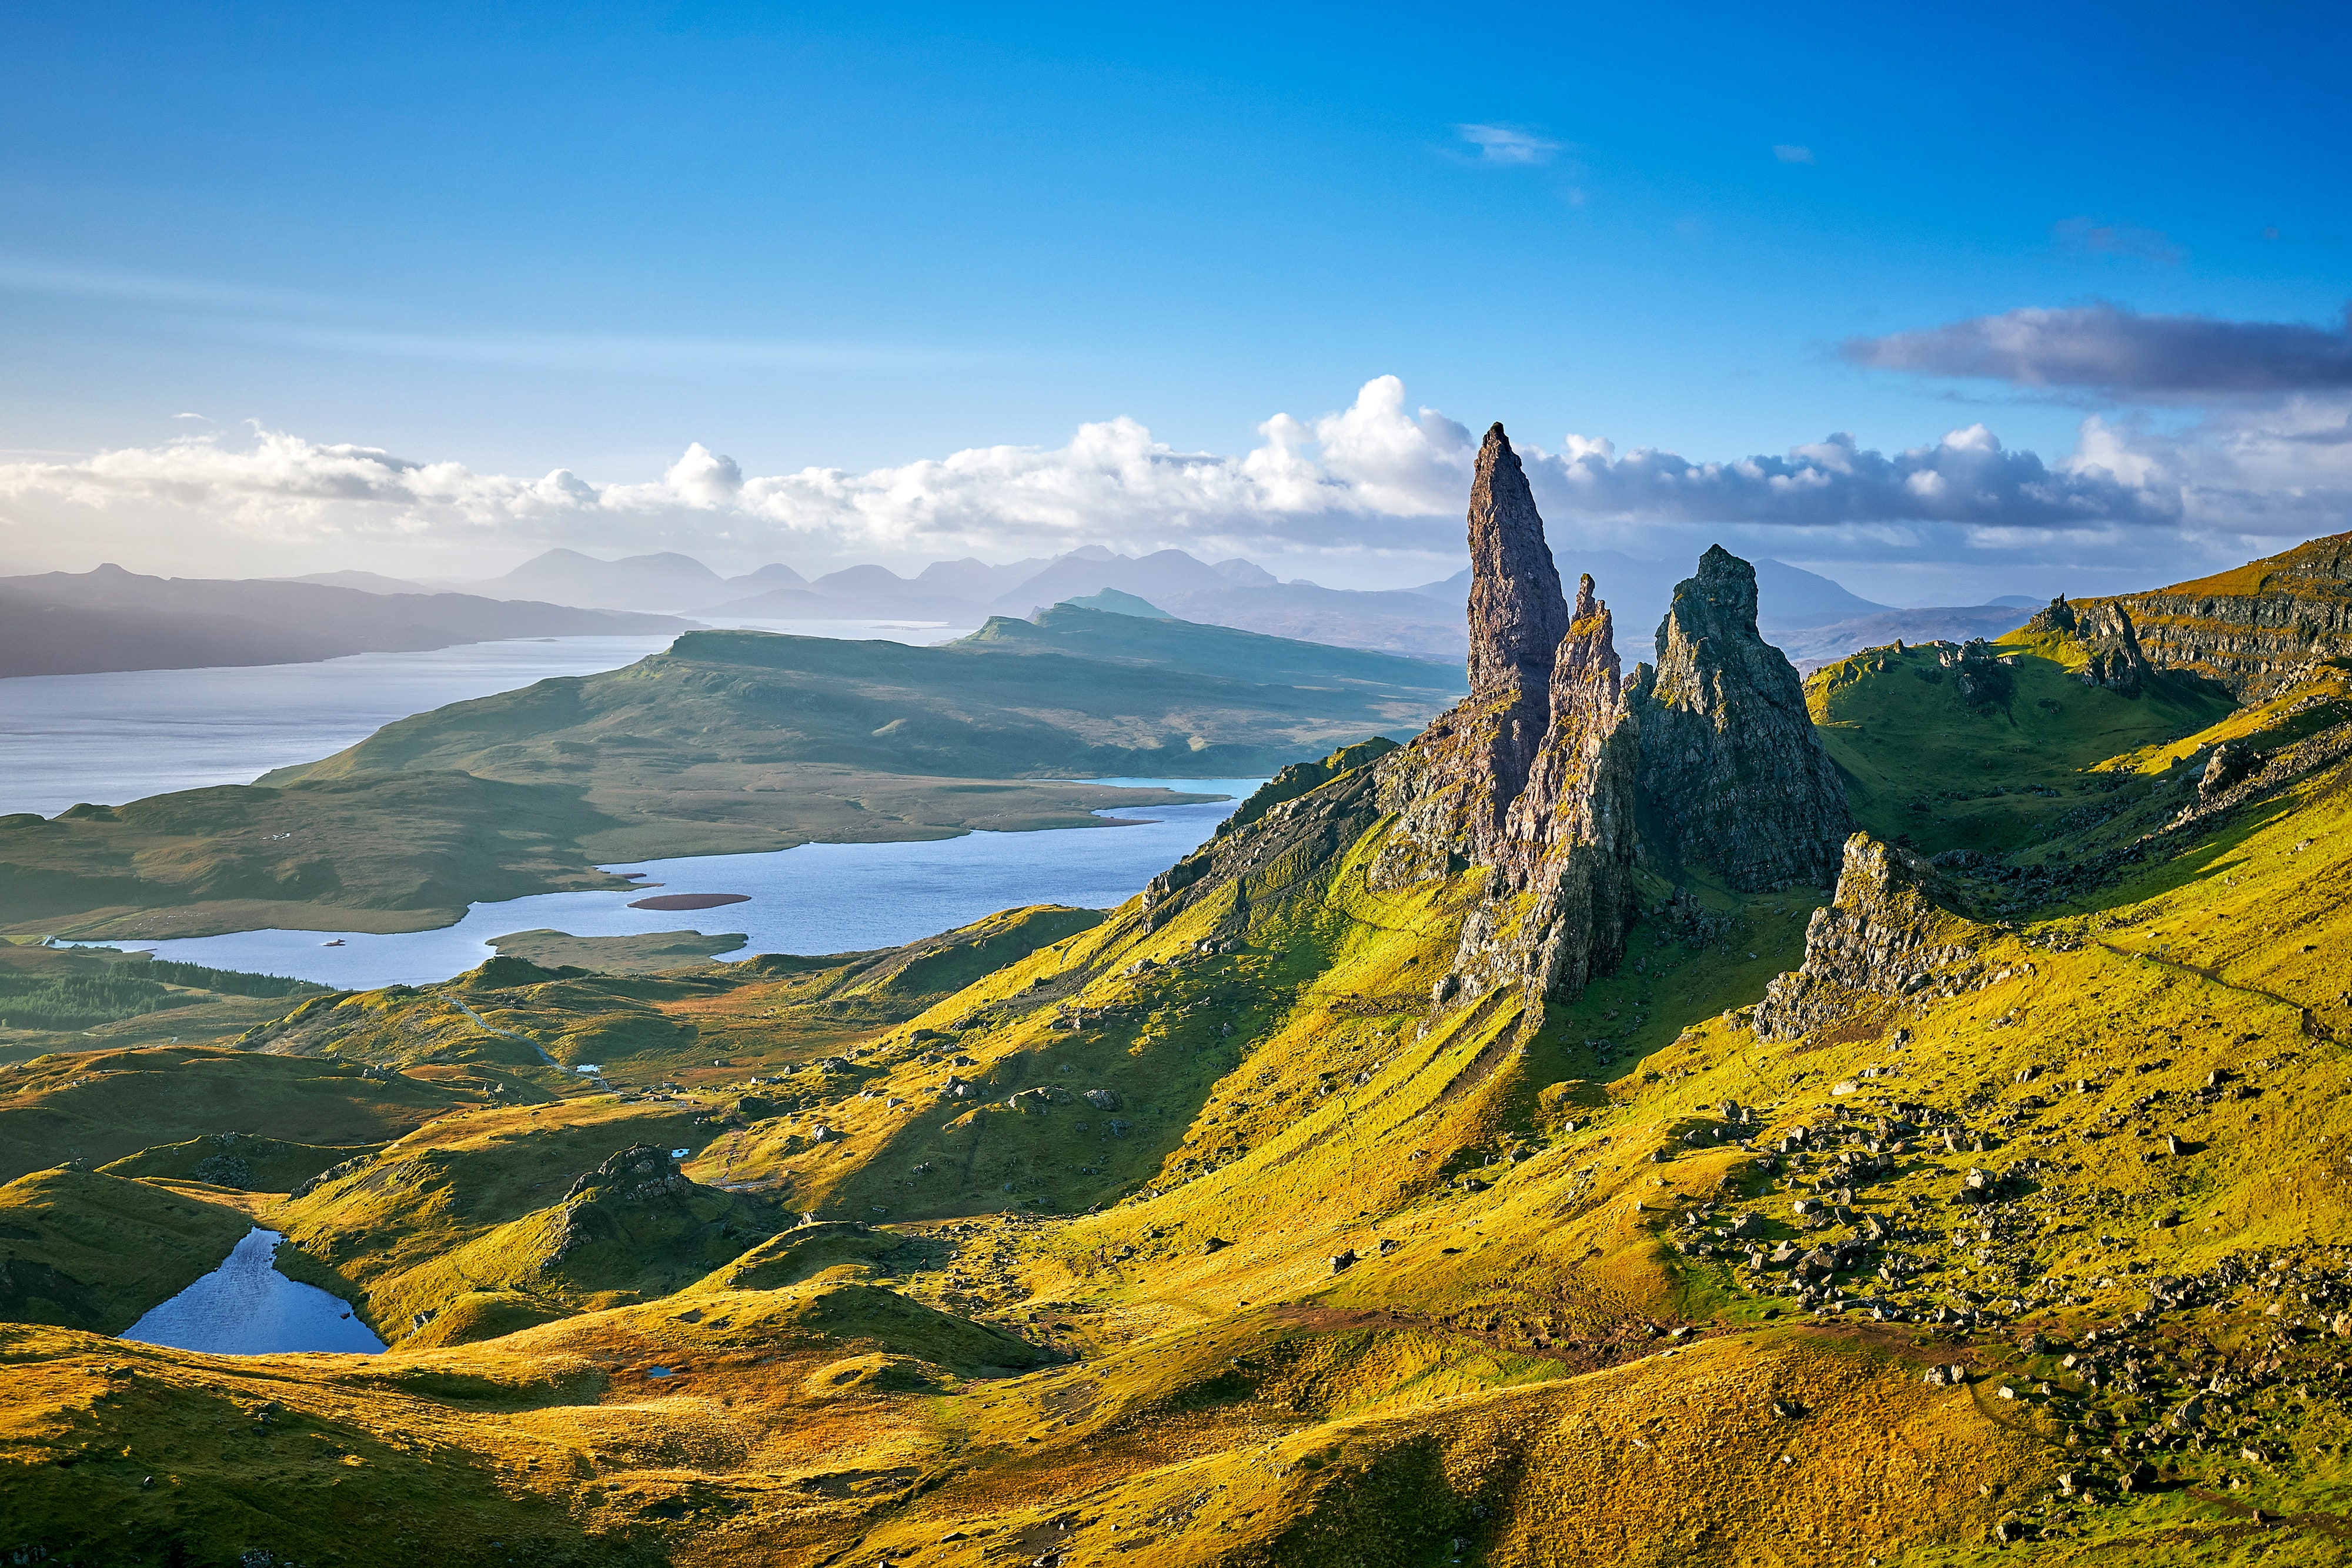 With fairy pools and endless undulations of hills, the magical <a href="https://www.cntraveler.com/gallery/the-8-scottish-islands-you-should-plan-to-visit?mbid=synd_msn_rss&utm_source=msn&utm_medium=syndication">Isle of Skye</a> is the stuff dreams are made of. While the nature here is timeless, the island also has a food scene that’s totally modern—we can’t think of a more beautiful place to sample Michelin-starred cuisine.<p>Sign up to receive the latest news, expert tips, and inspiration on all things travel</p><a href="https://www.cntraveler.com/newsletter/the-daily?sourceCode=msnsend">Inspire Me</a>